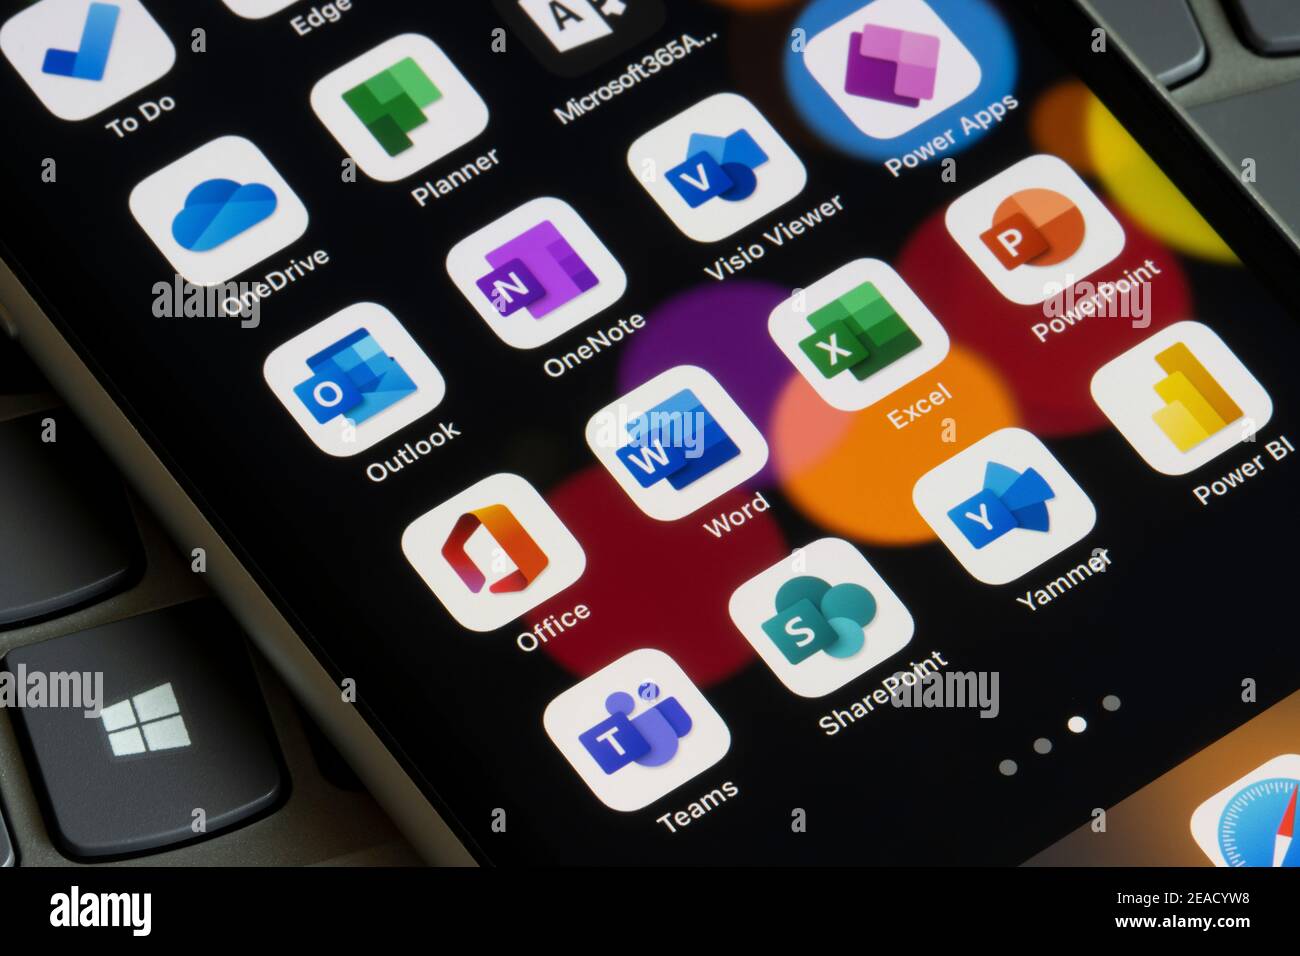 Microsoft 365 apps are seen on an iPhone - Office, Word, Excel, PowerPoint, Outlook, OneNote, Visio Viewer, Power Apps, Teams, SharePoint, Yammer, etc. Stock Photo